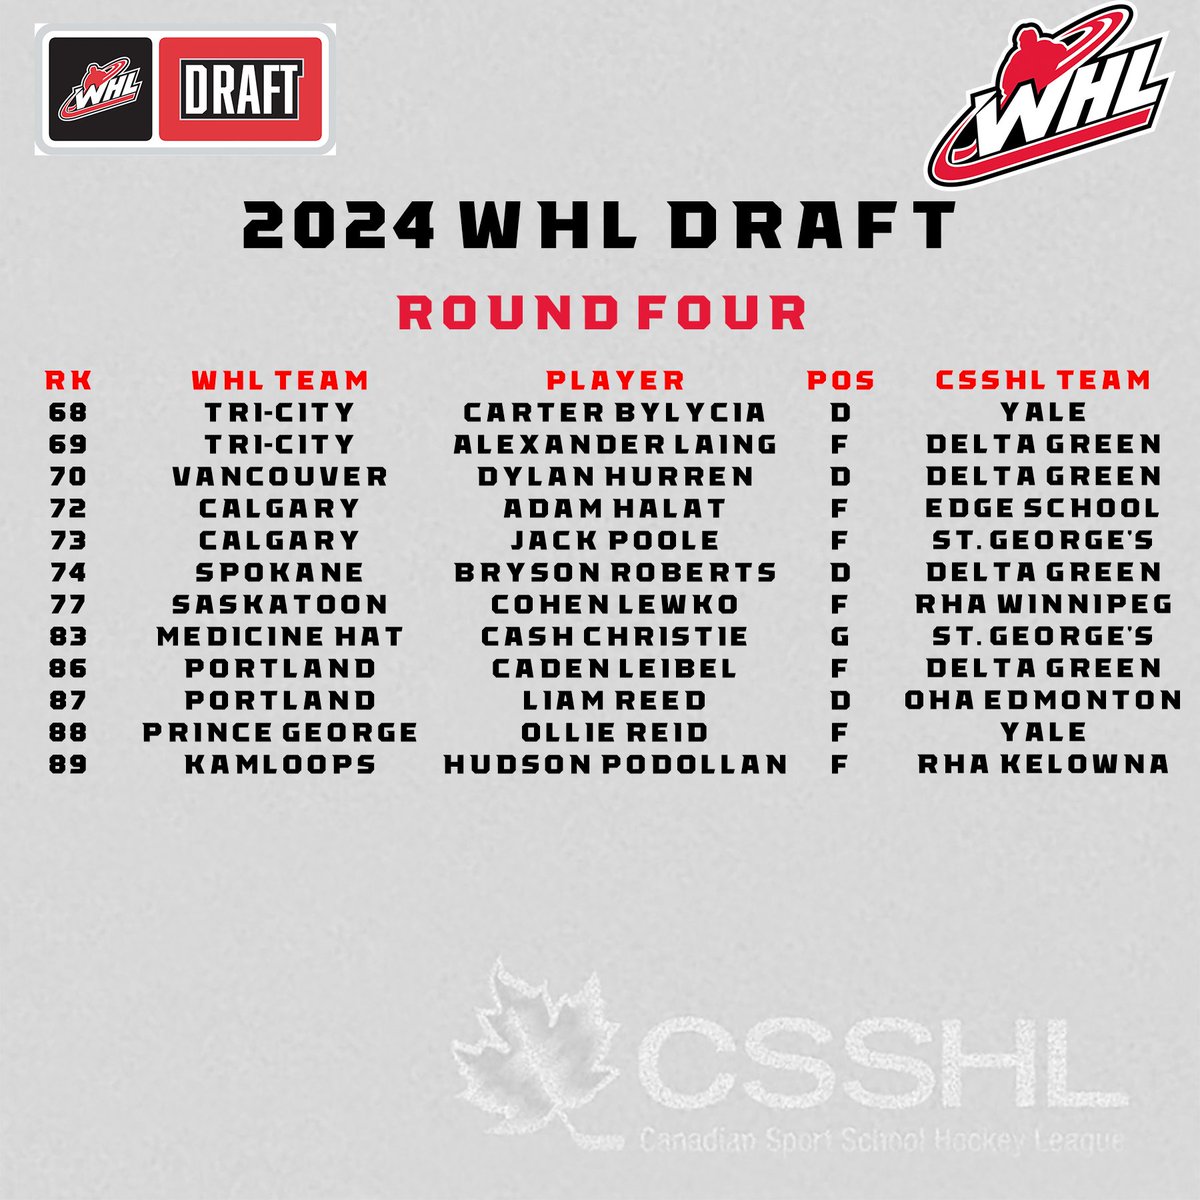 Congratulations to the 12 CSSHL student-athletes selected in the fourth round of the 2024 WHL Draft!